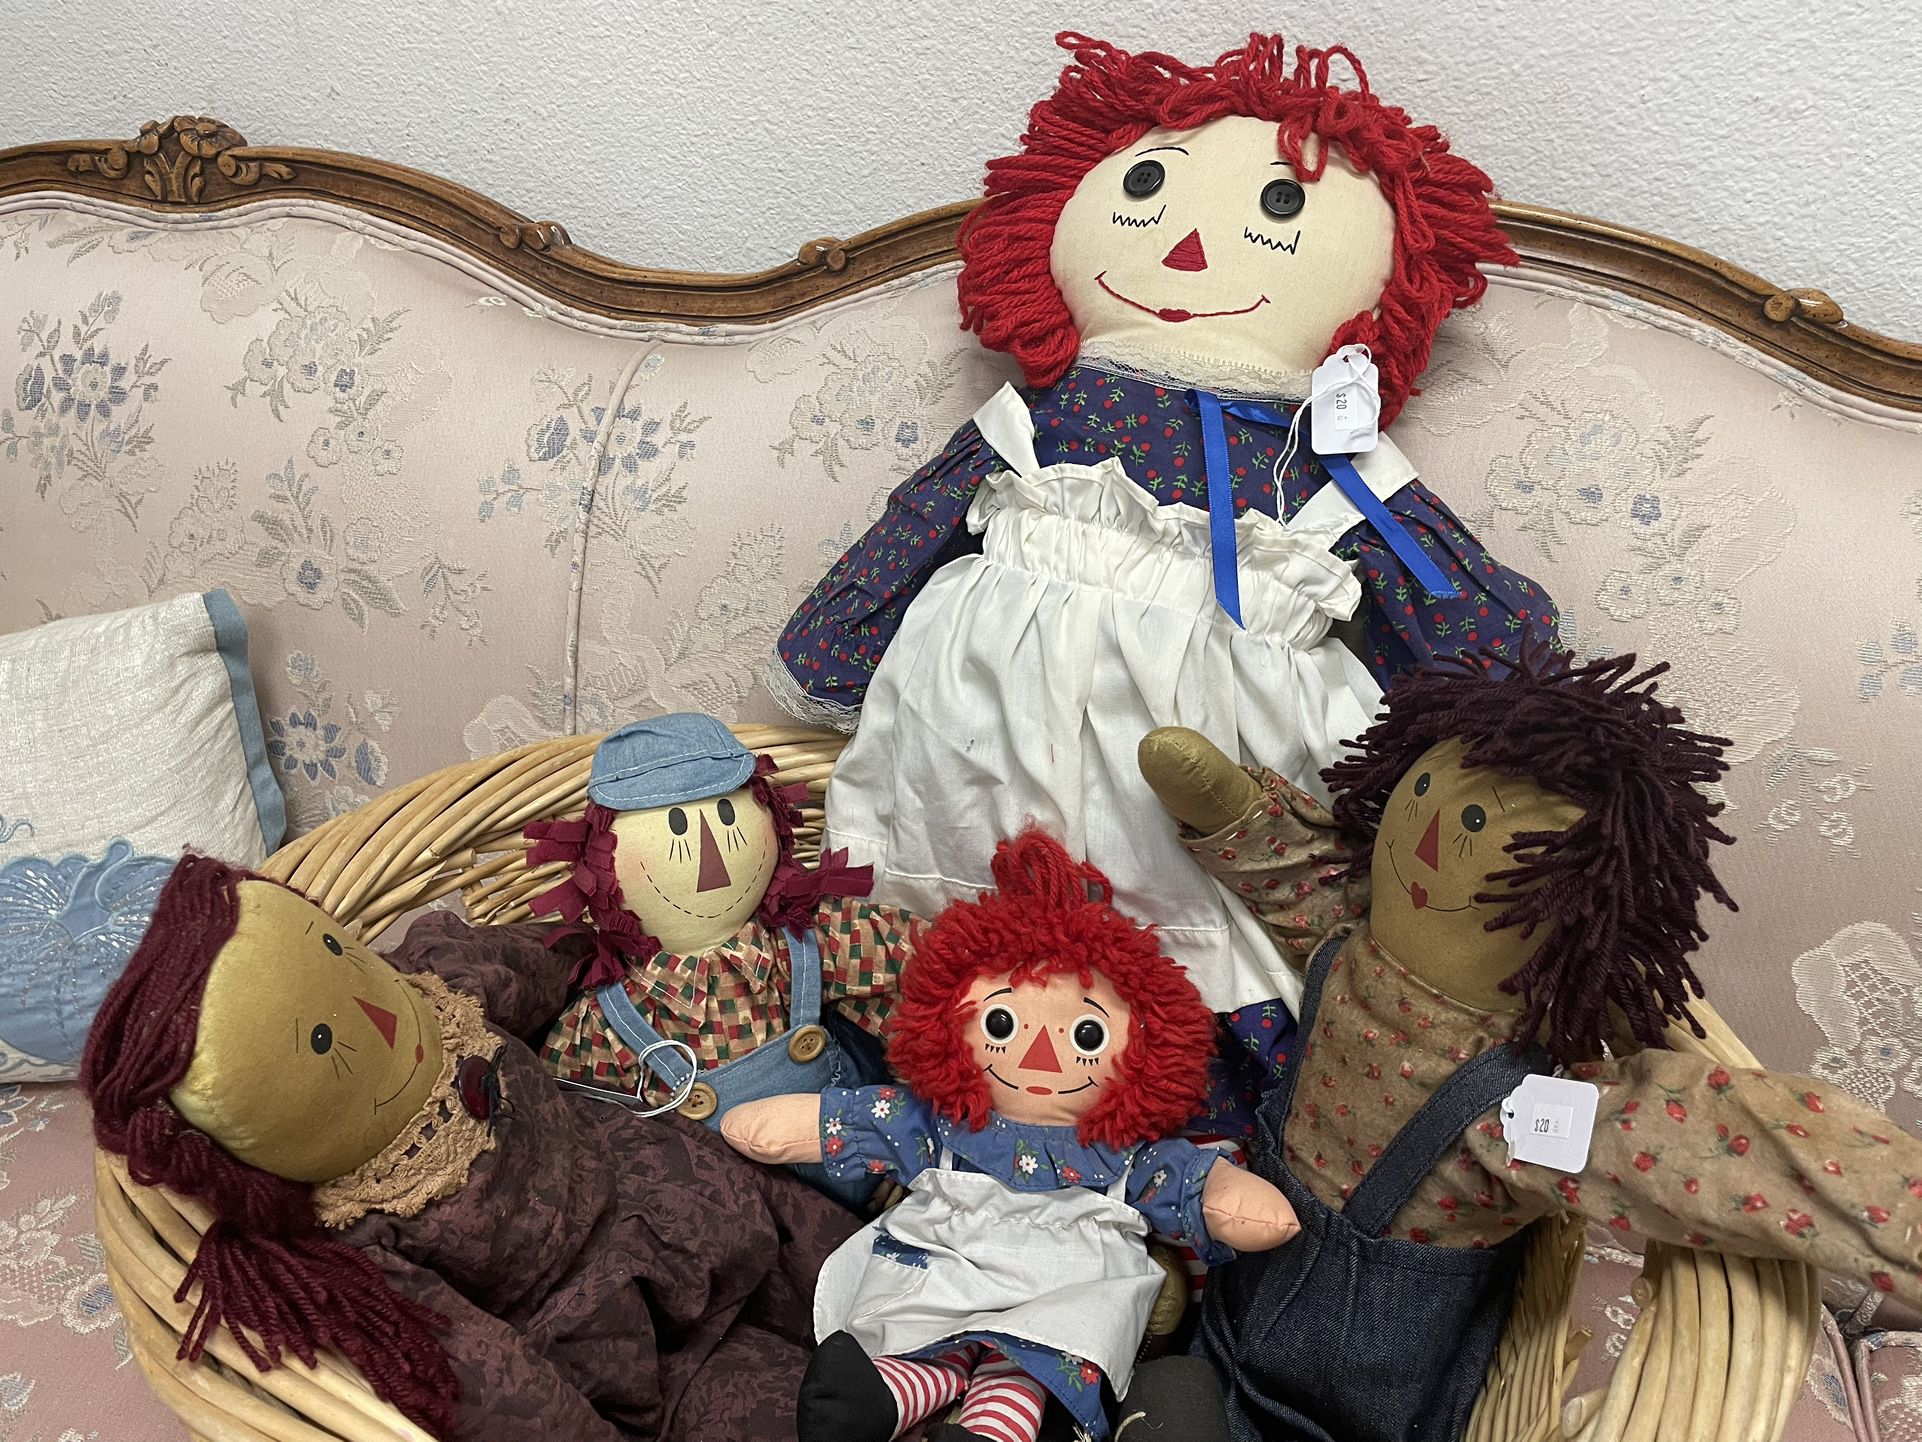 Raggedy Ann And Andy dolls